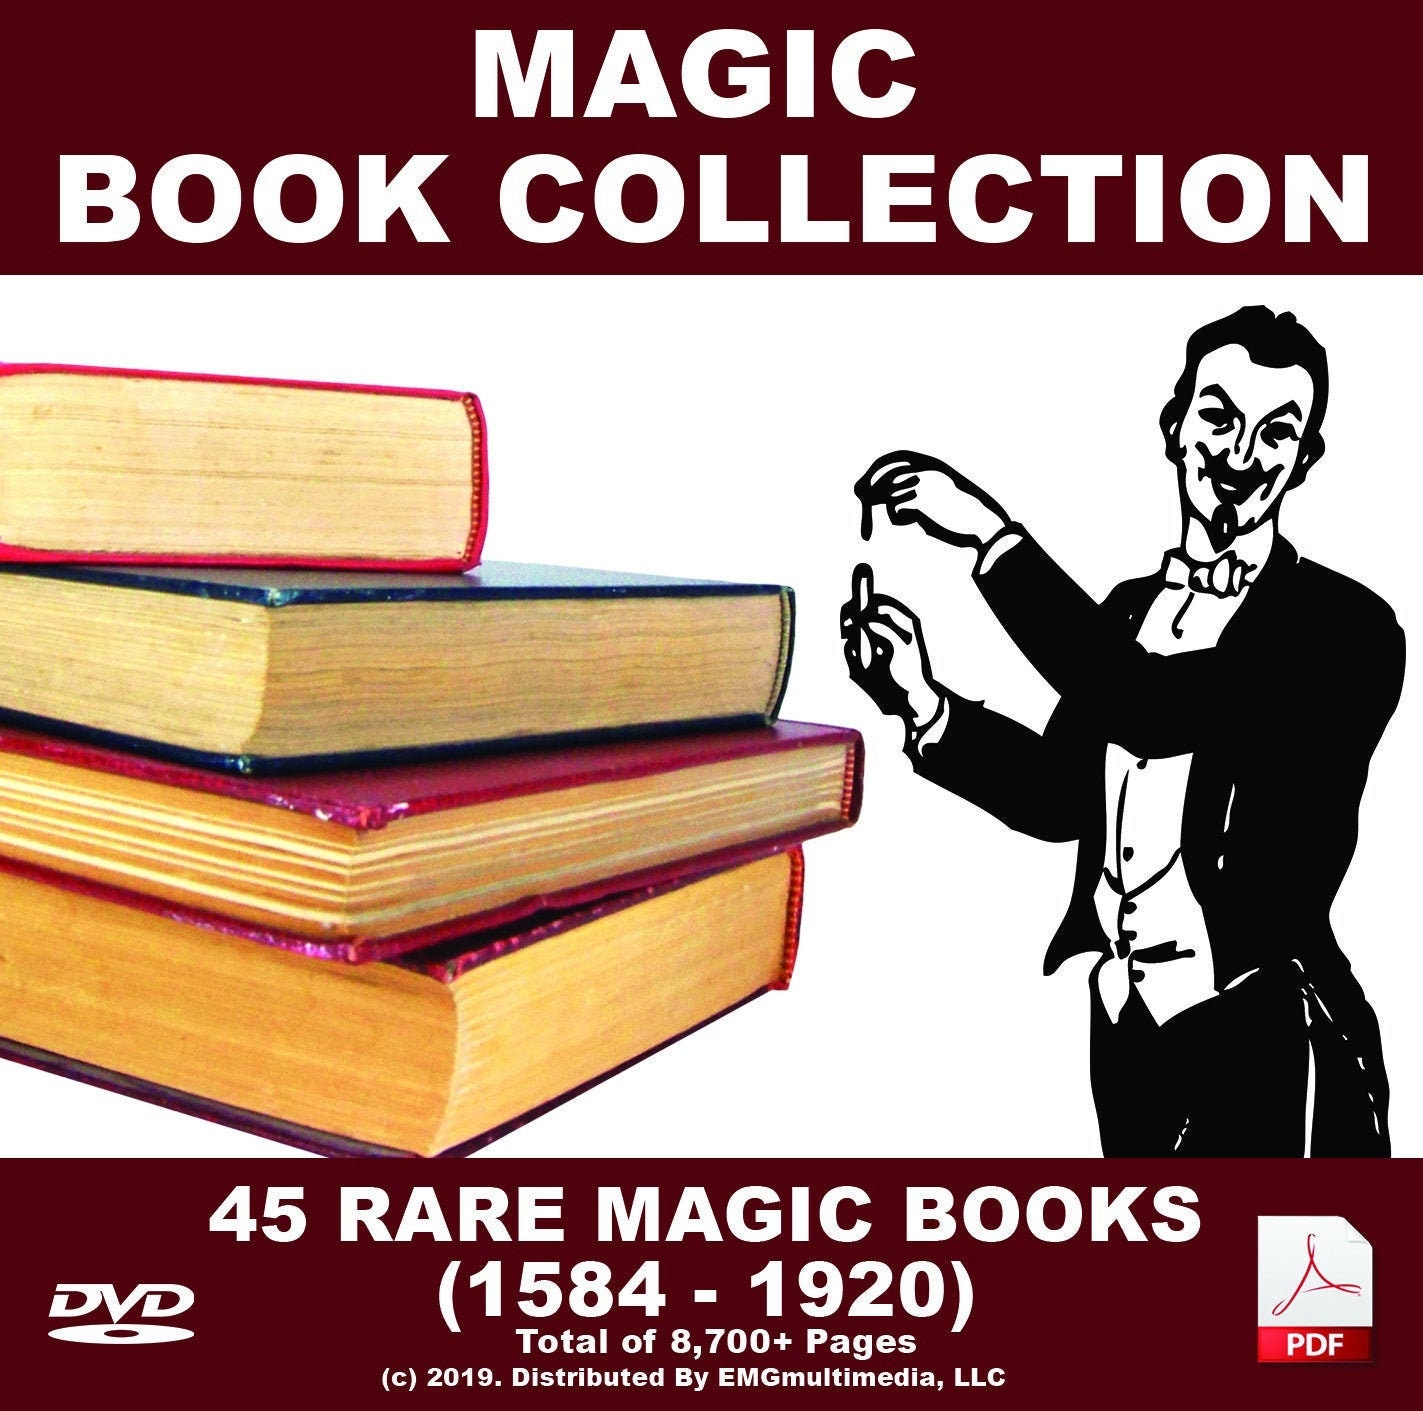 More Fun With Magic by Joseph Leeming, Magic Book With Illustrations by  Jessie Robinson, Learn Magic Tricks, Kids Magic Book, Magician Gift 